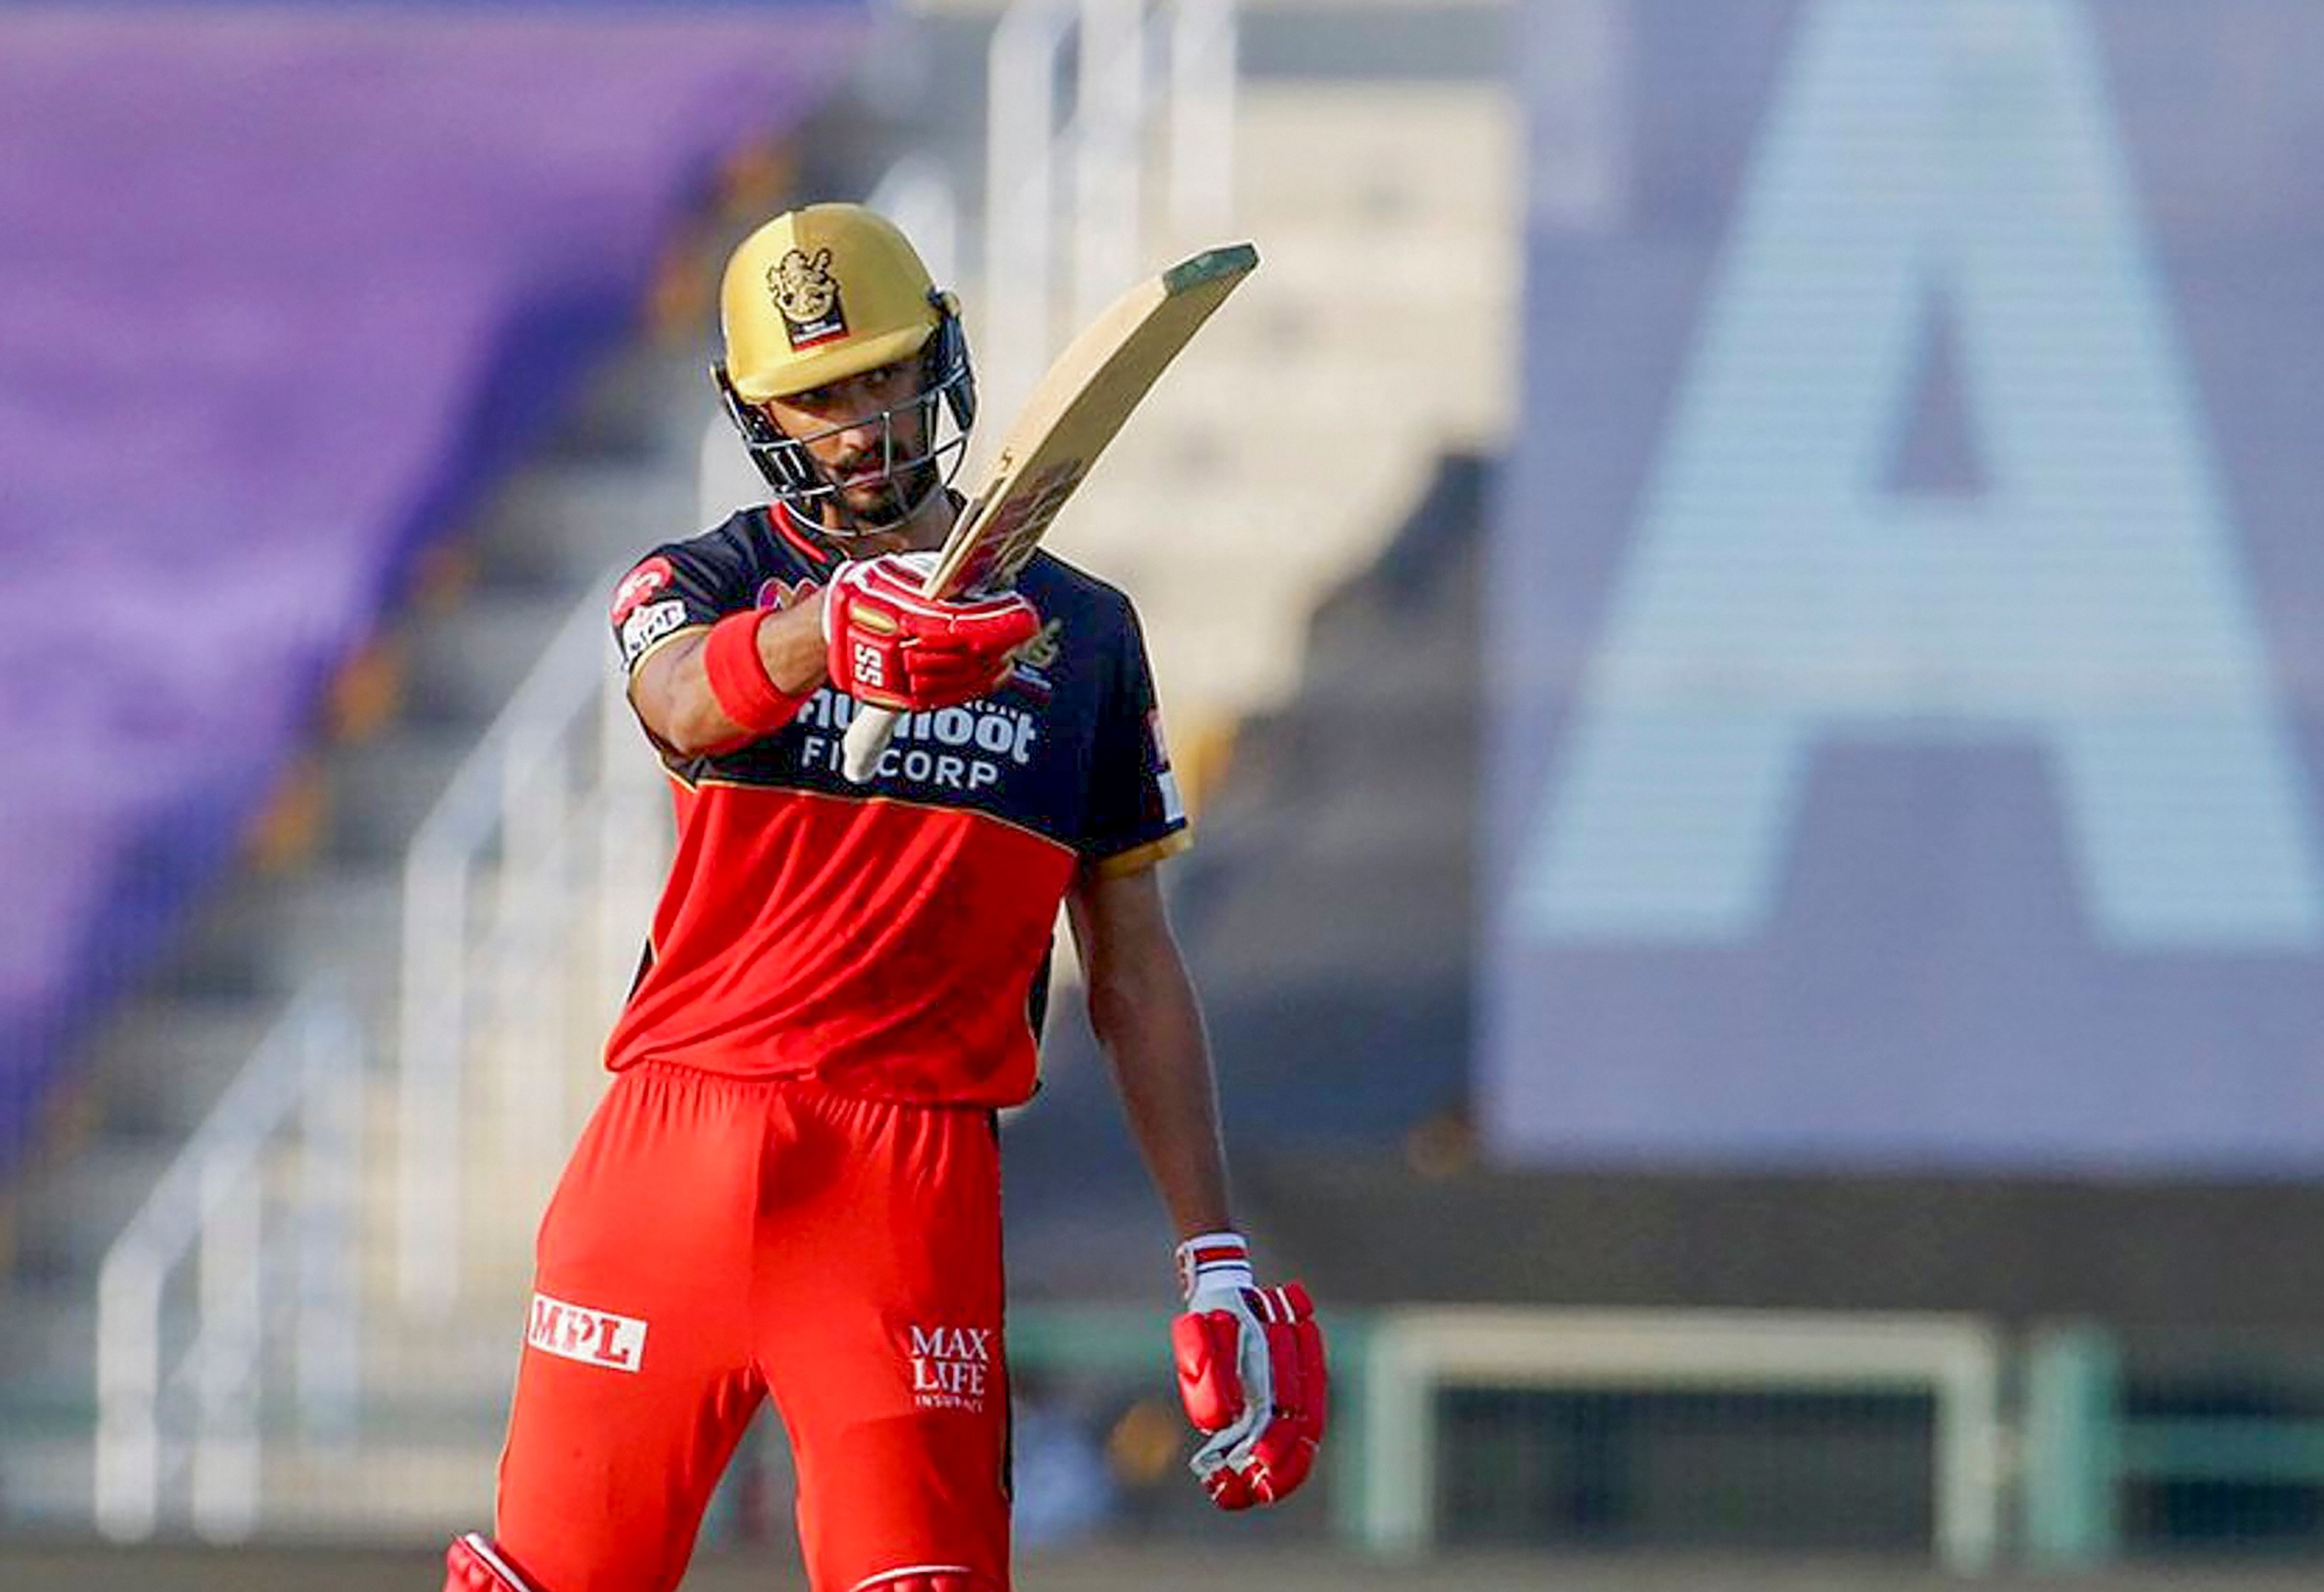 DEVDUTT PADIKKAL: It feels curious to allude to the Karnataka lad as a rookie, though he is, because of how very established he seems already. In scoring 473 runs from 15 games at 31.53 per game for Royal Challengers Bangalore, he won the Emerging Player award. More importantly, he made it all looking good.